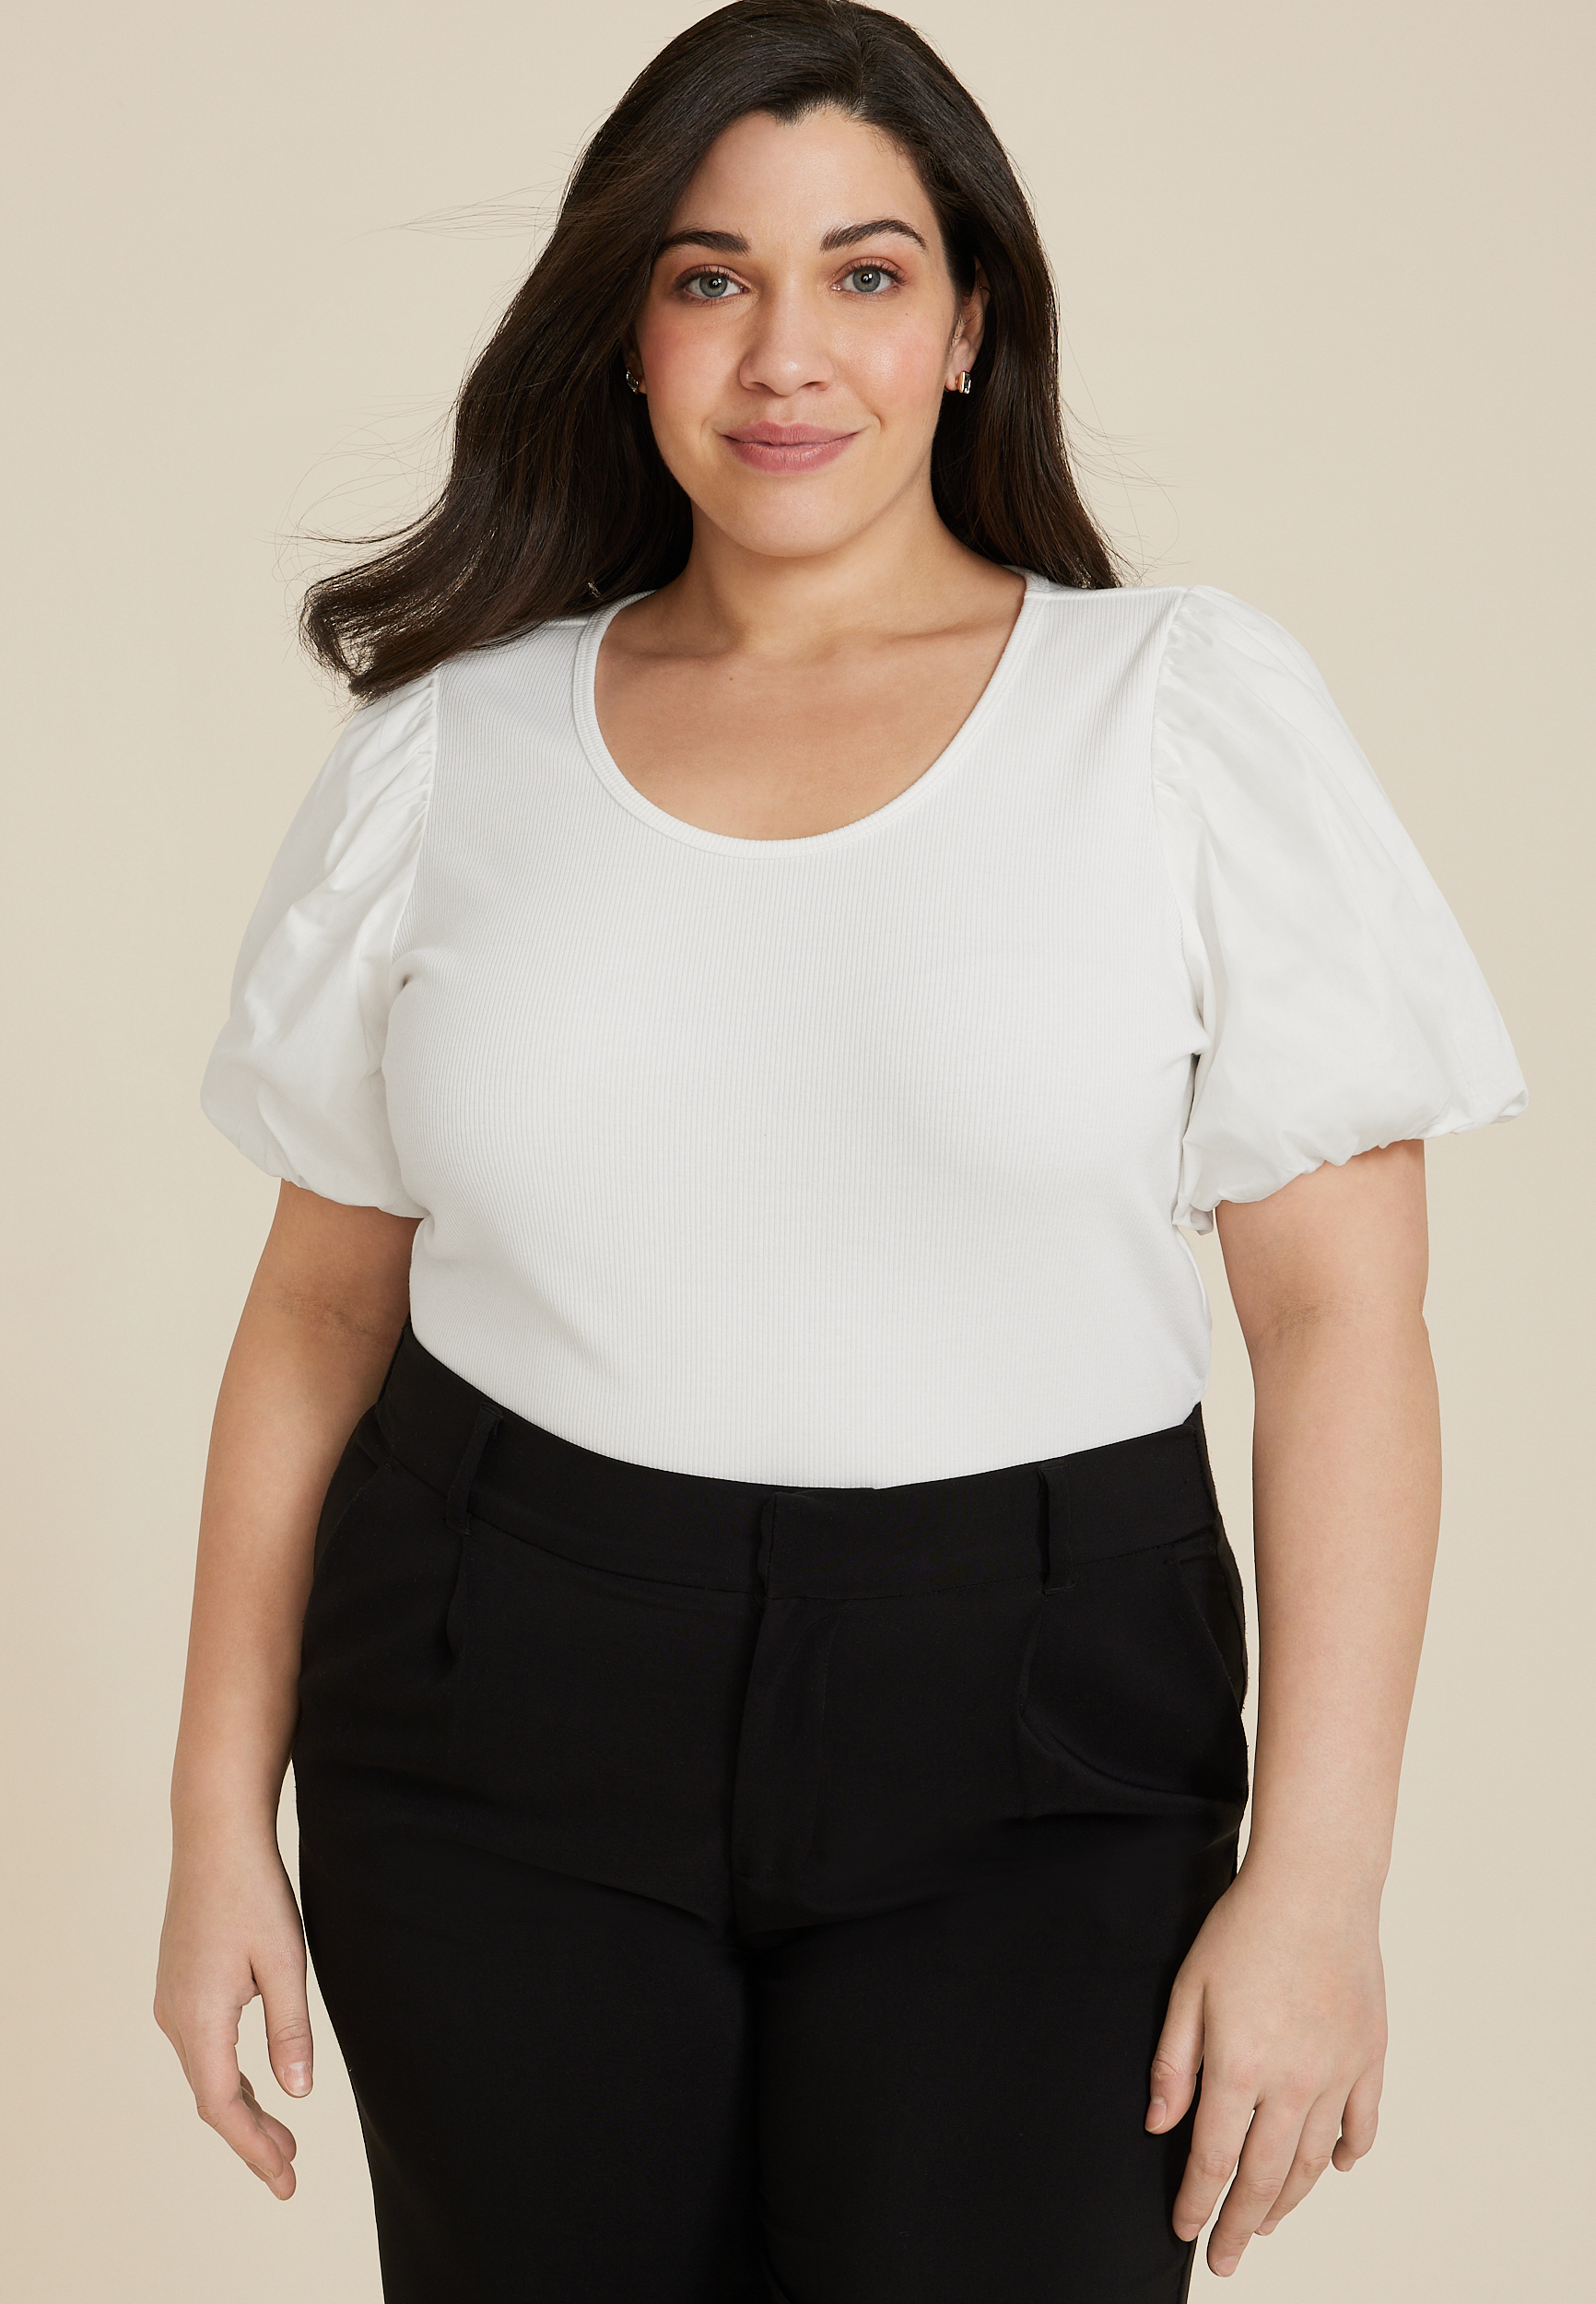 Women's Plus Size Tops: Plus Tanks, Tees, Sweaters & More